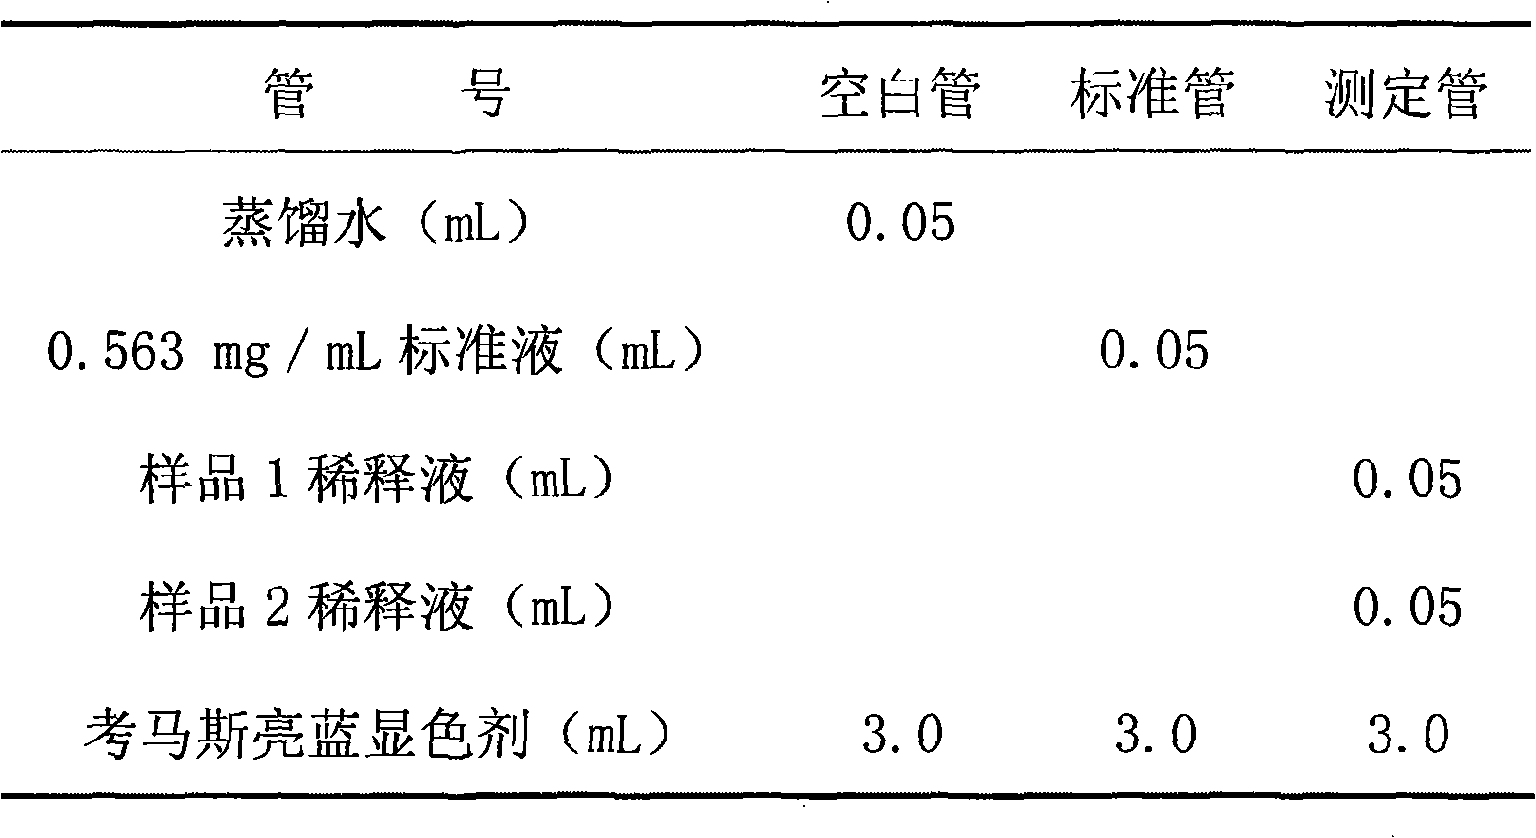 Process for extracting rice bran protein